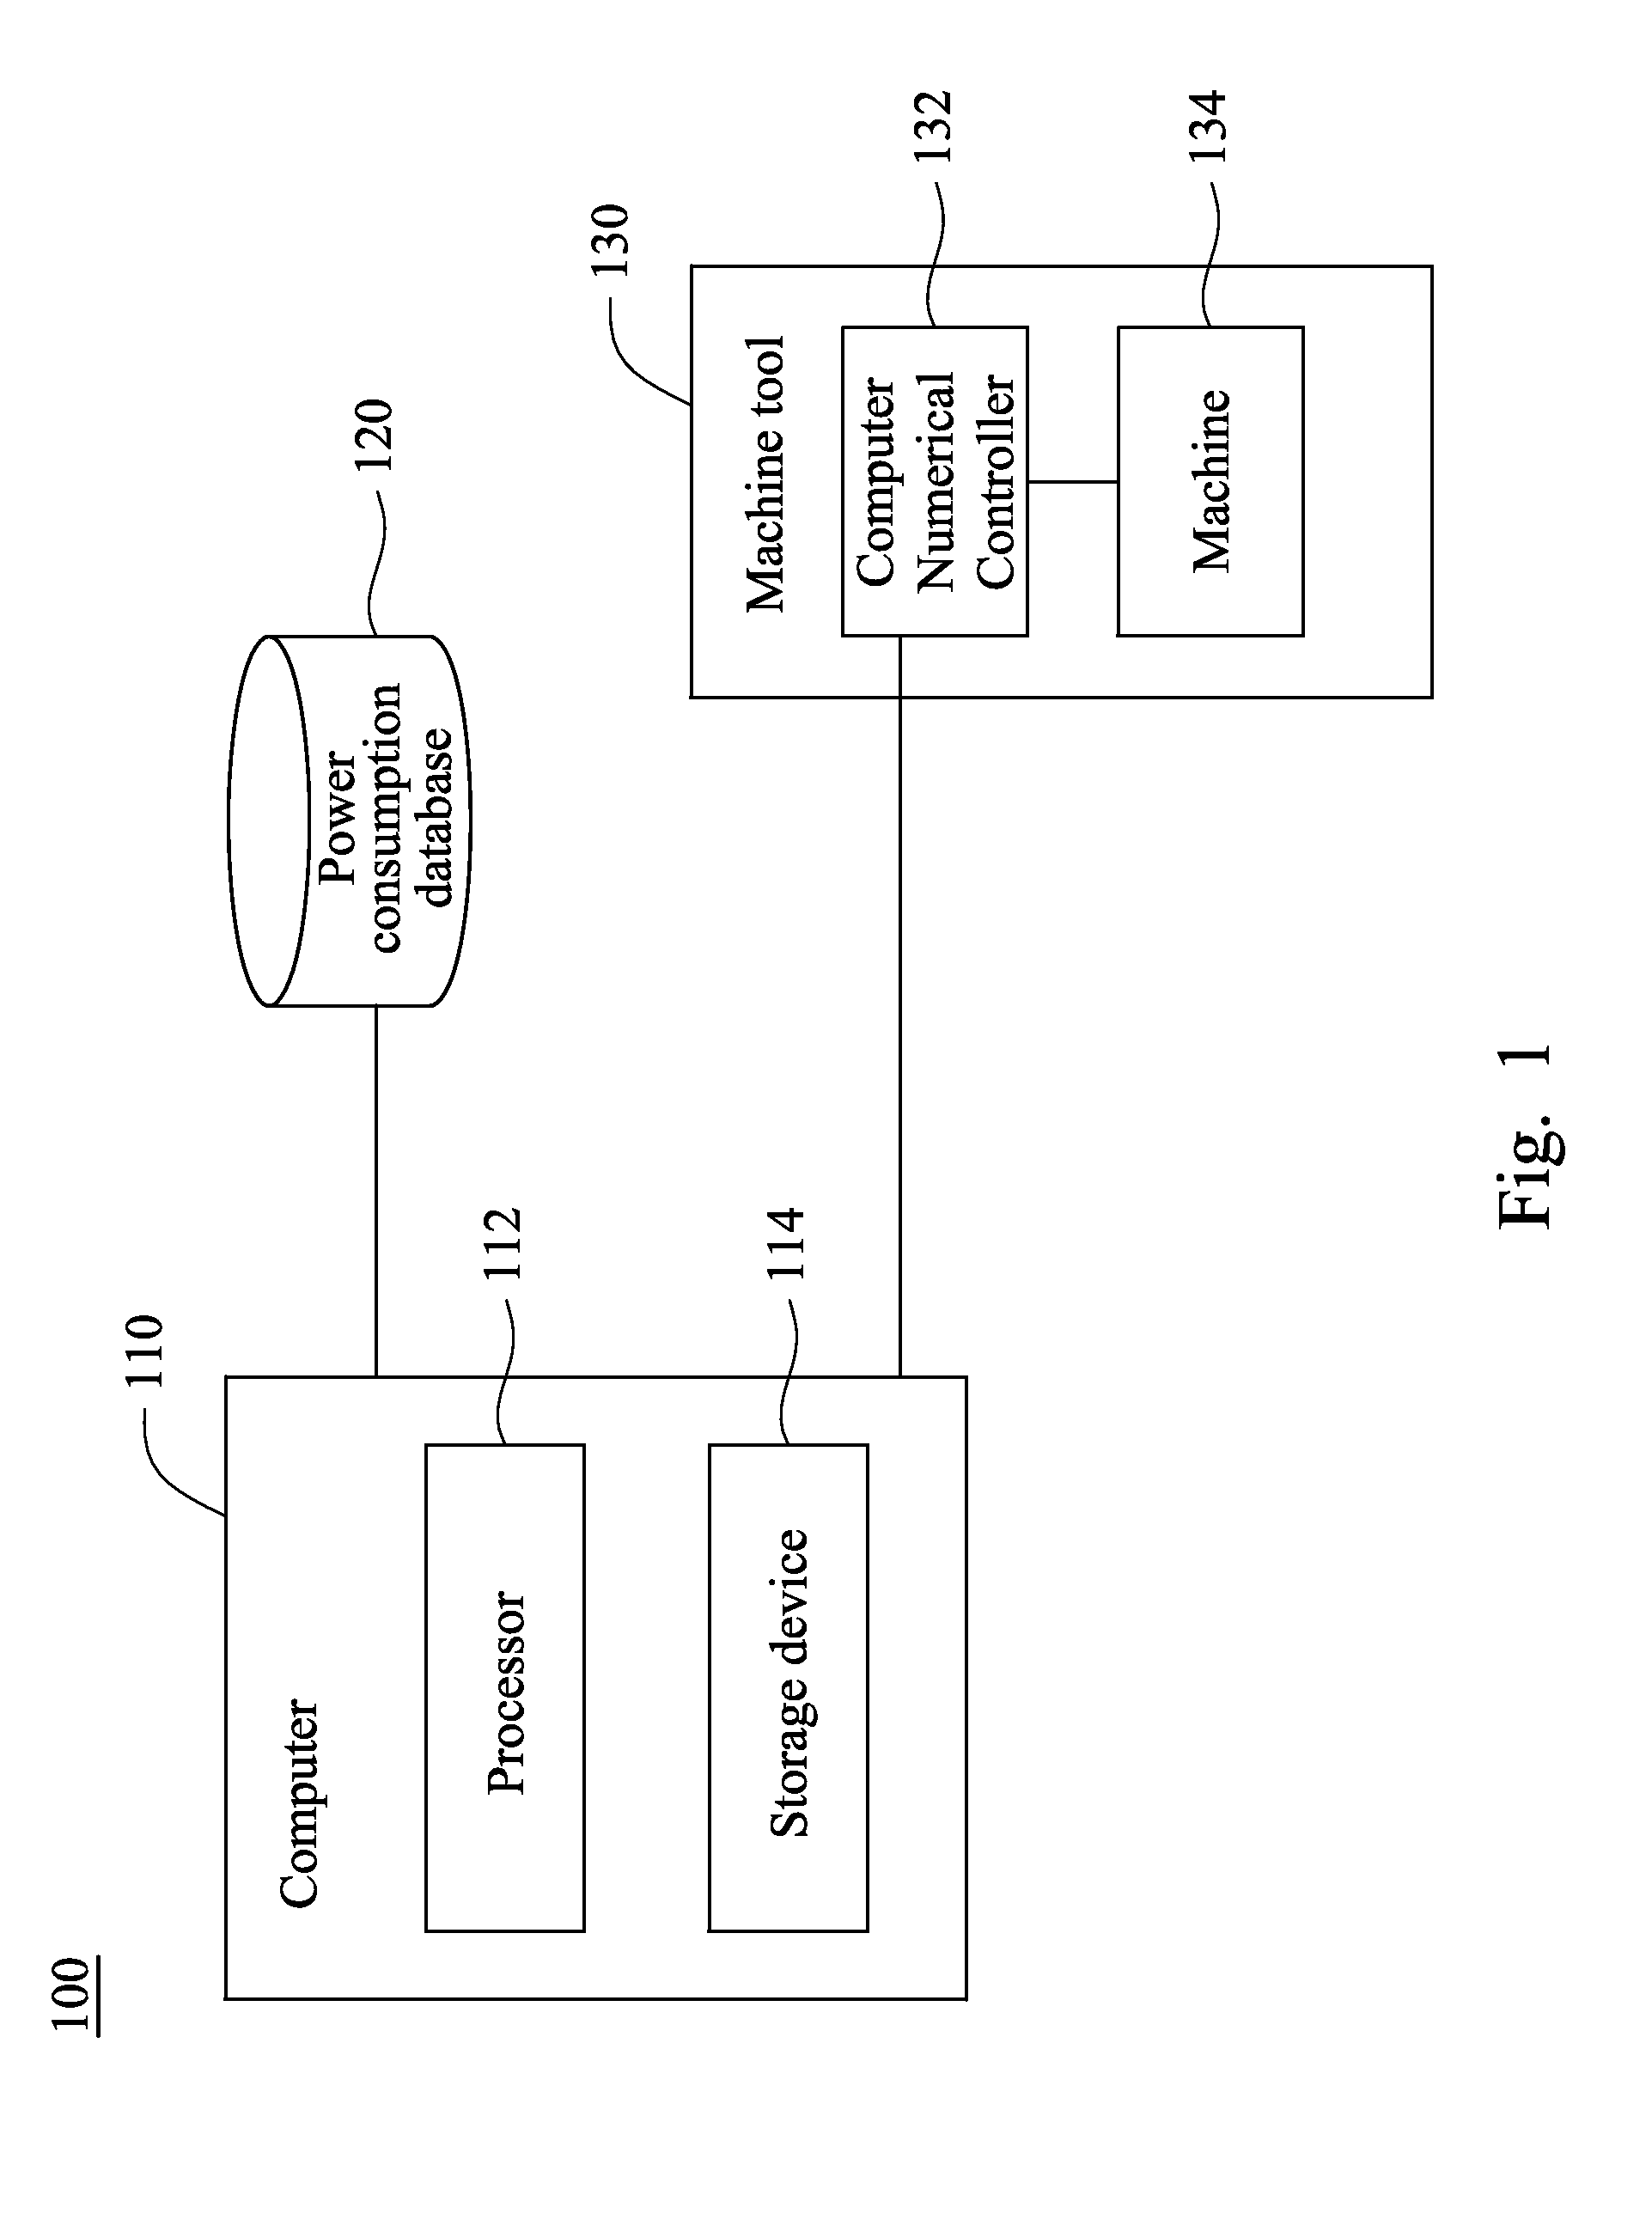 Machine tool power consumption prediction system and method